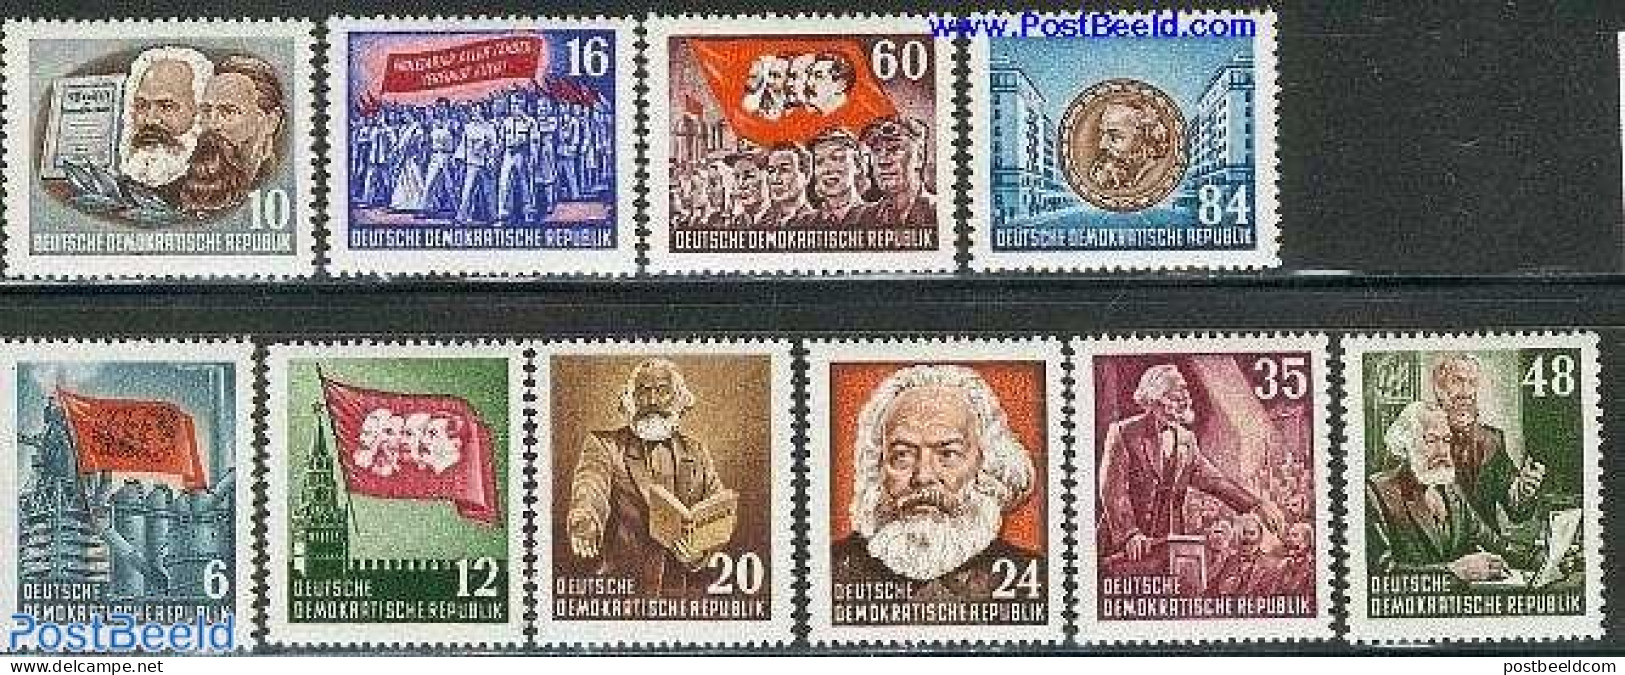 Germany, DDR 1953 K. MARX 10V, Mint NH, Art - Authors - Unused Stamps